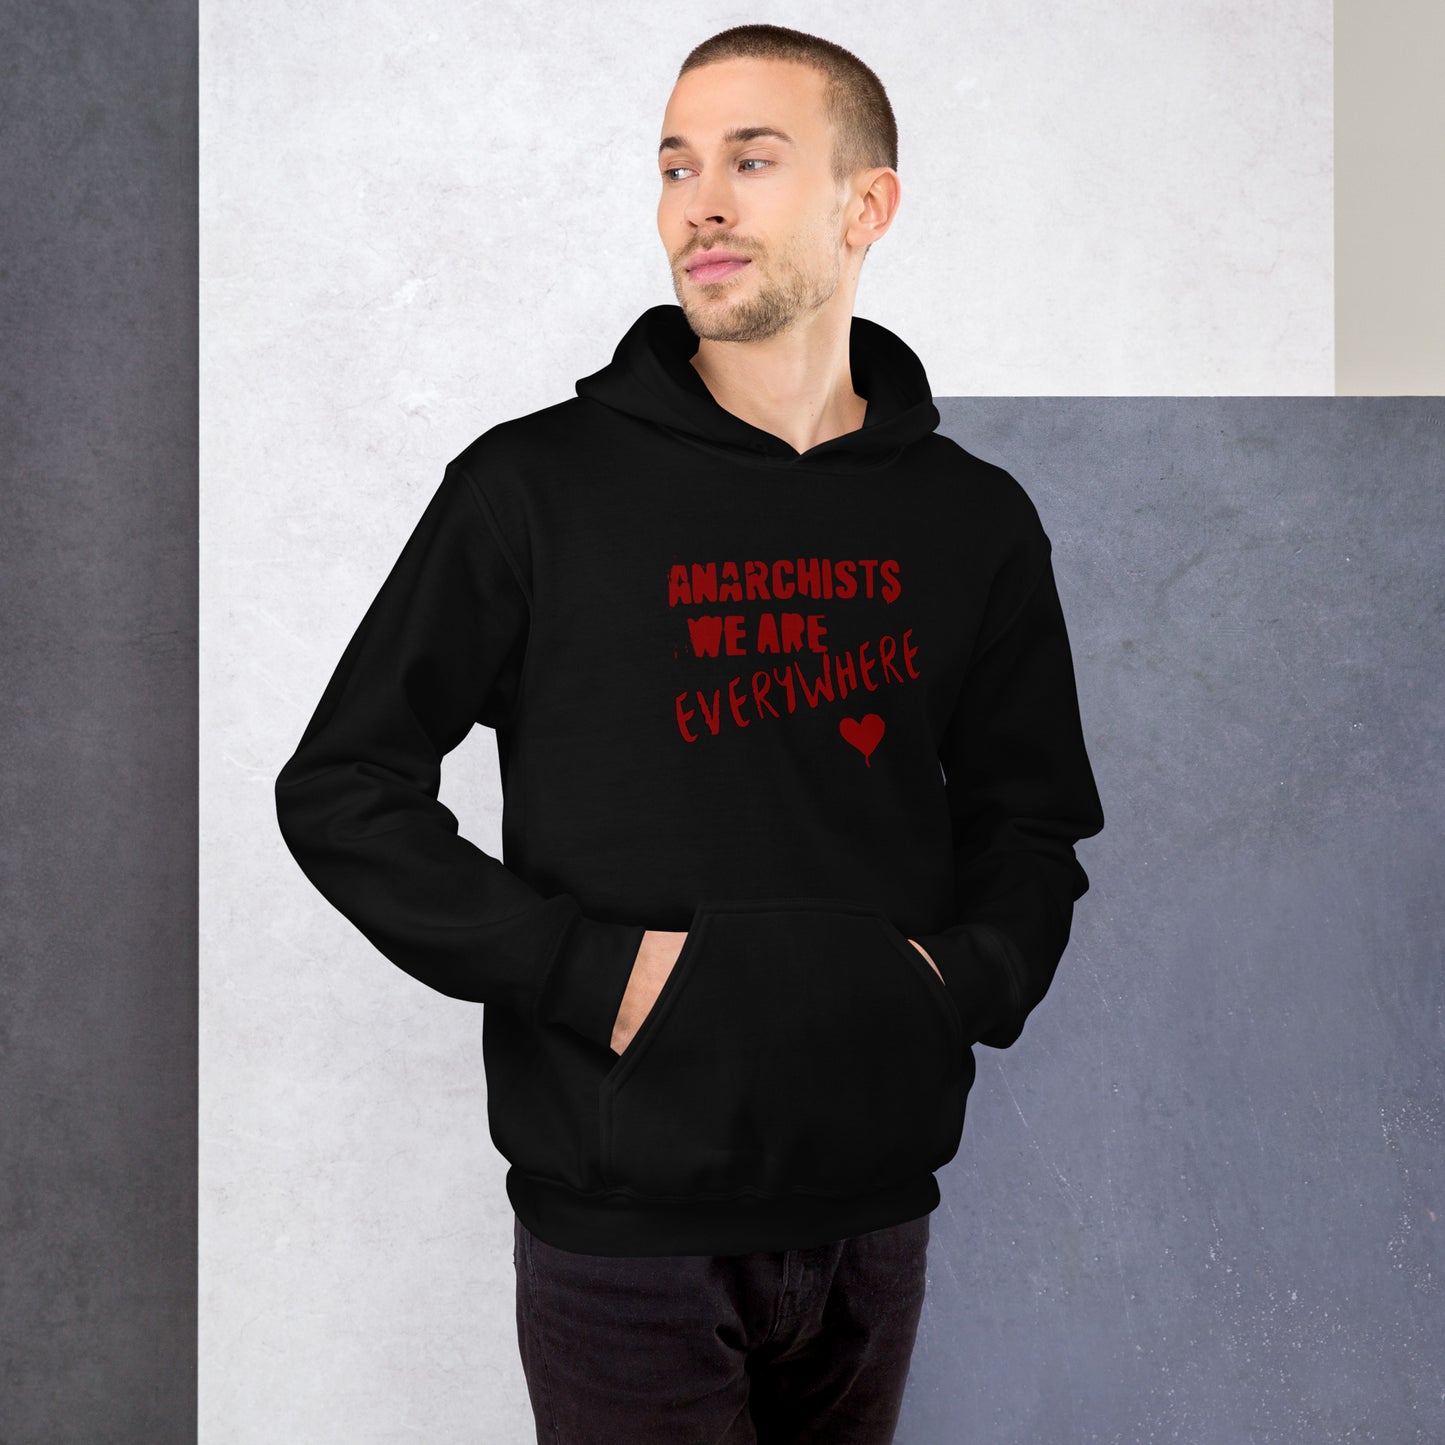 Anarchy Wear "We Are Every Where" Red Unisex Hoodie